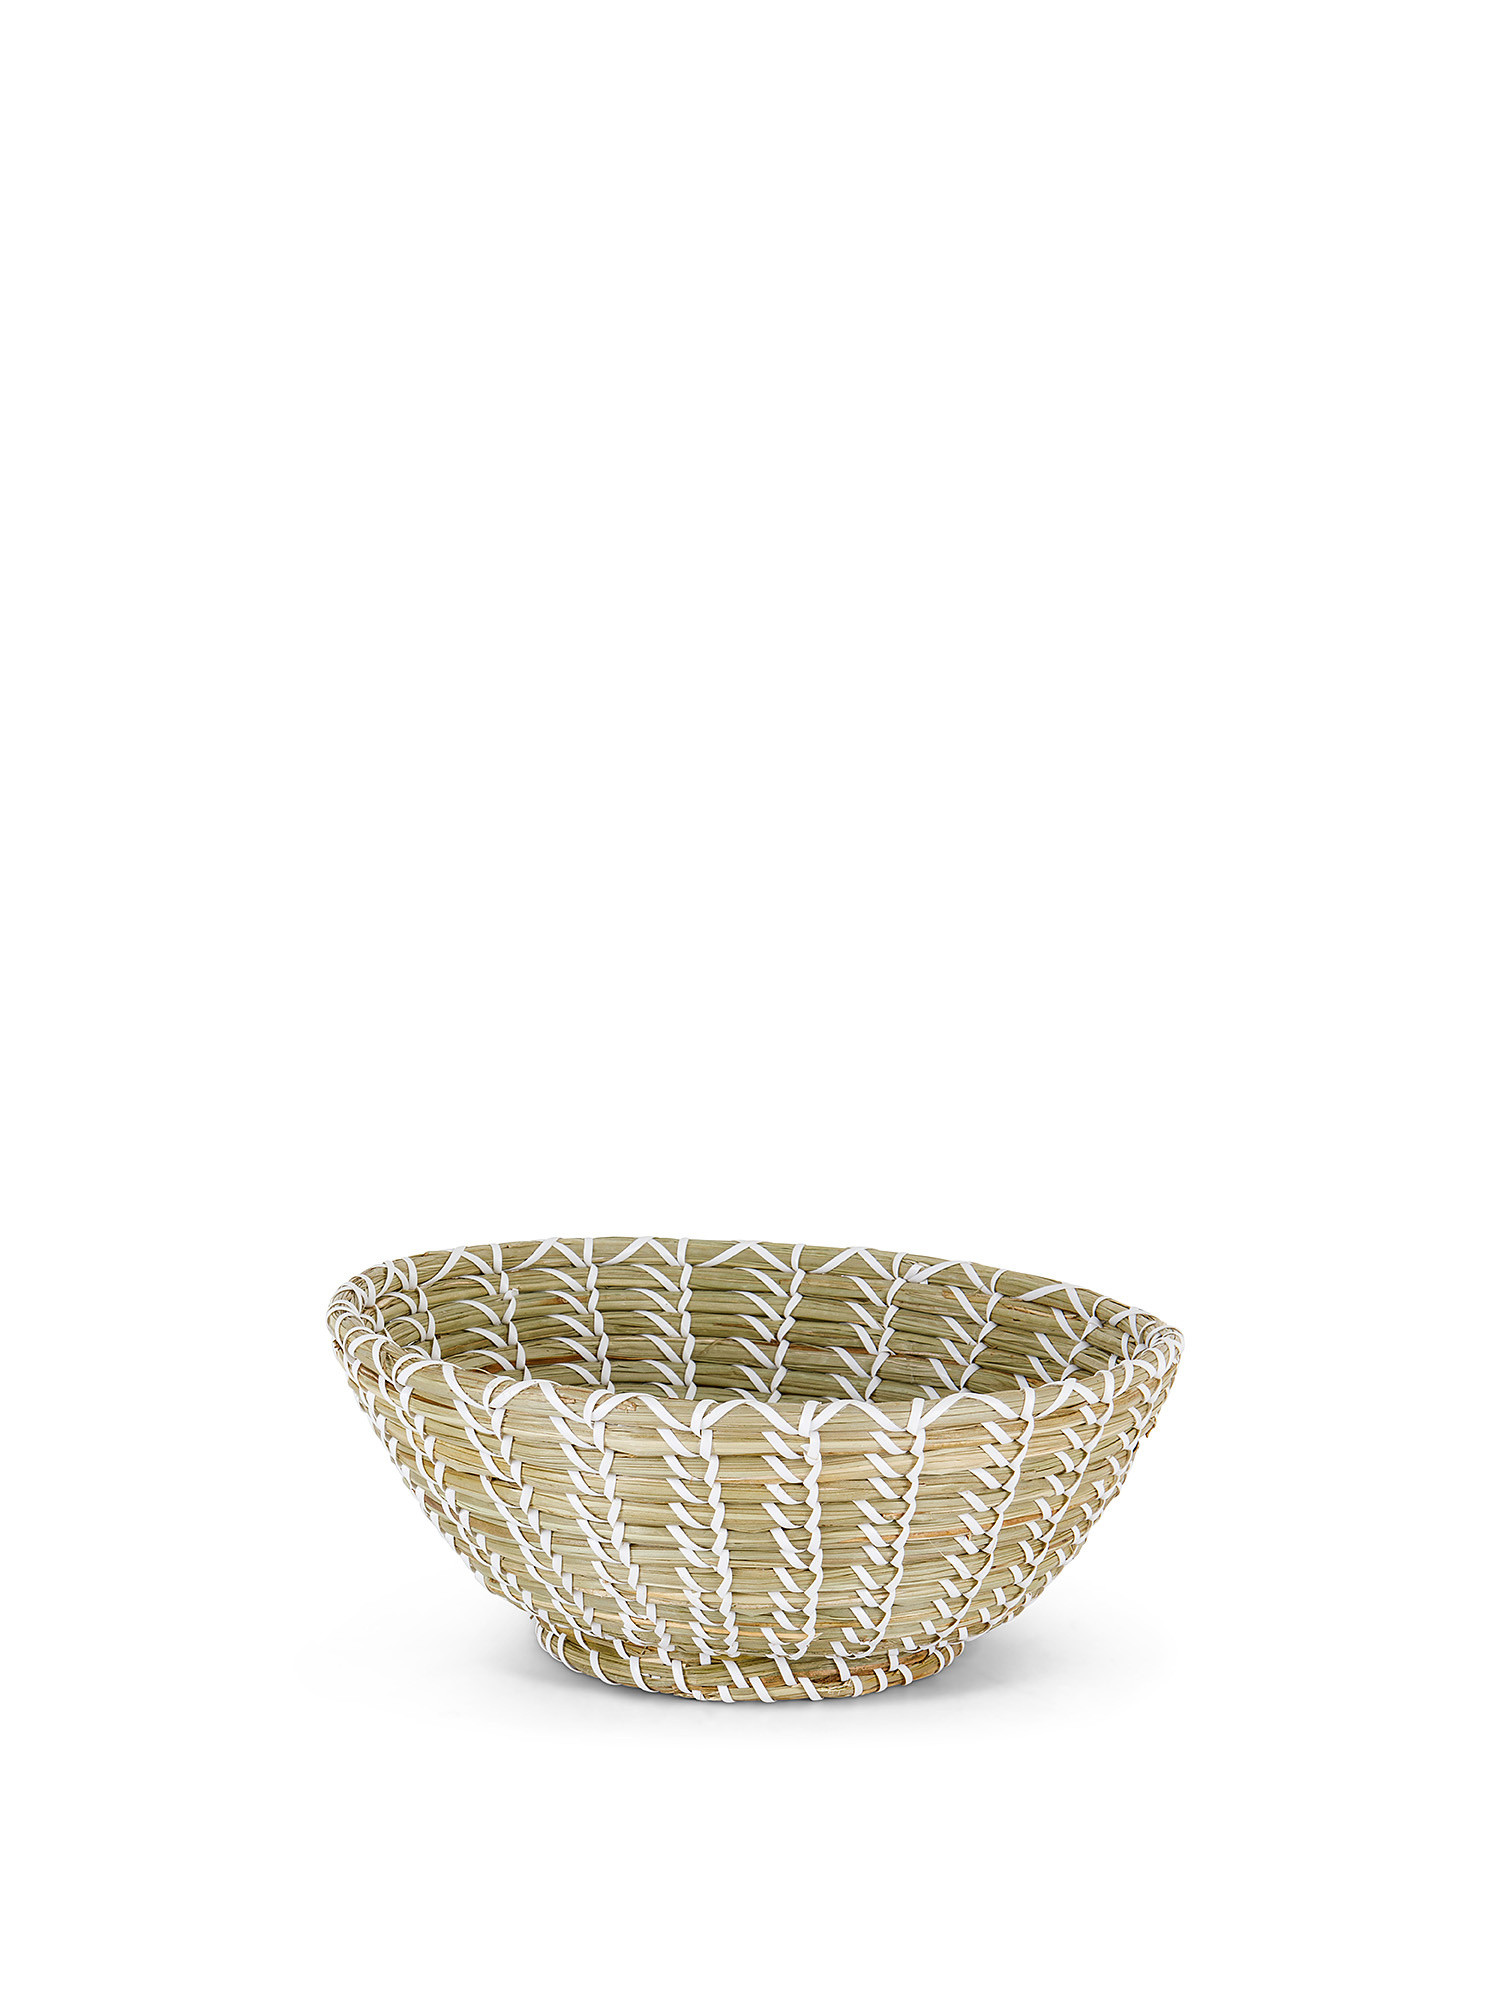 Coppa con piede in seagrass, Beige, large image number 0